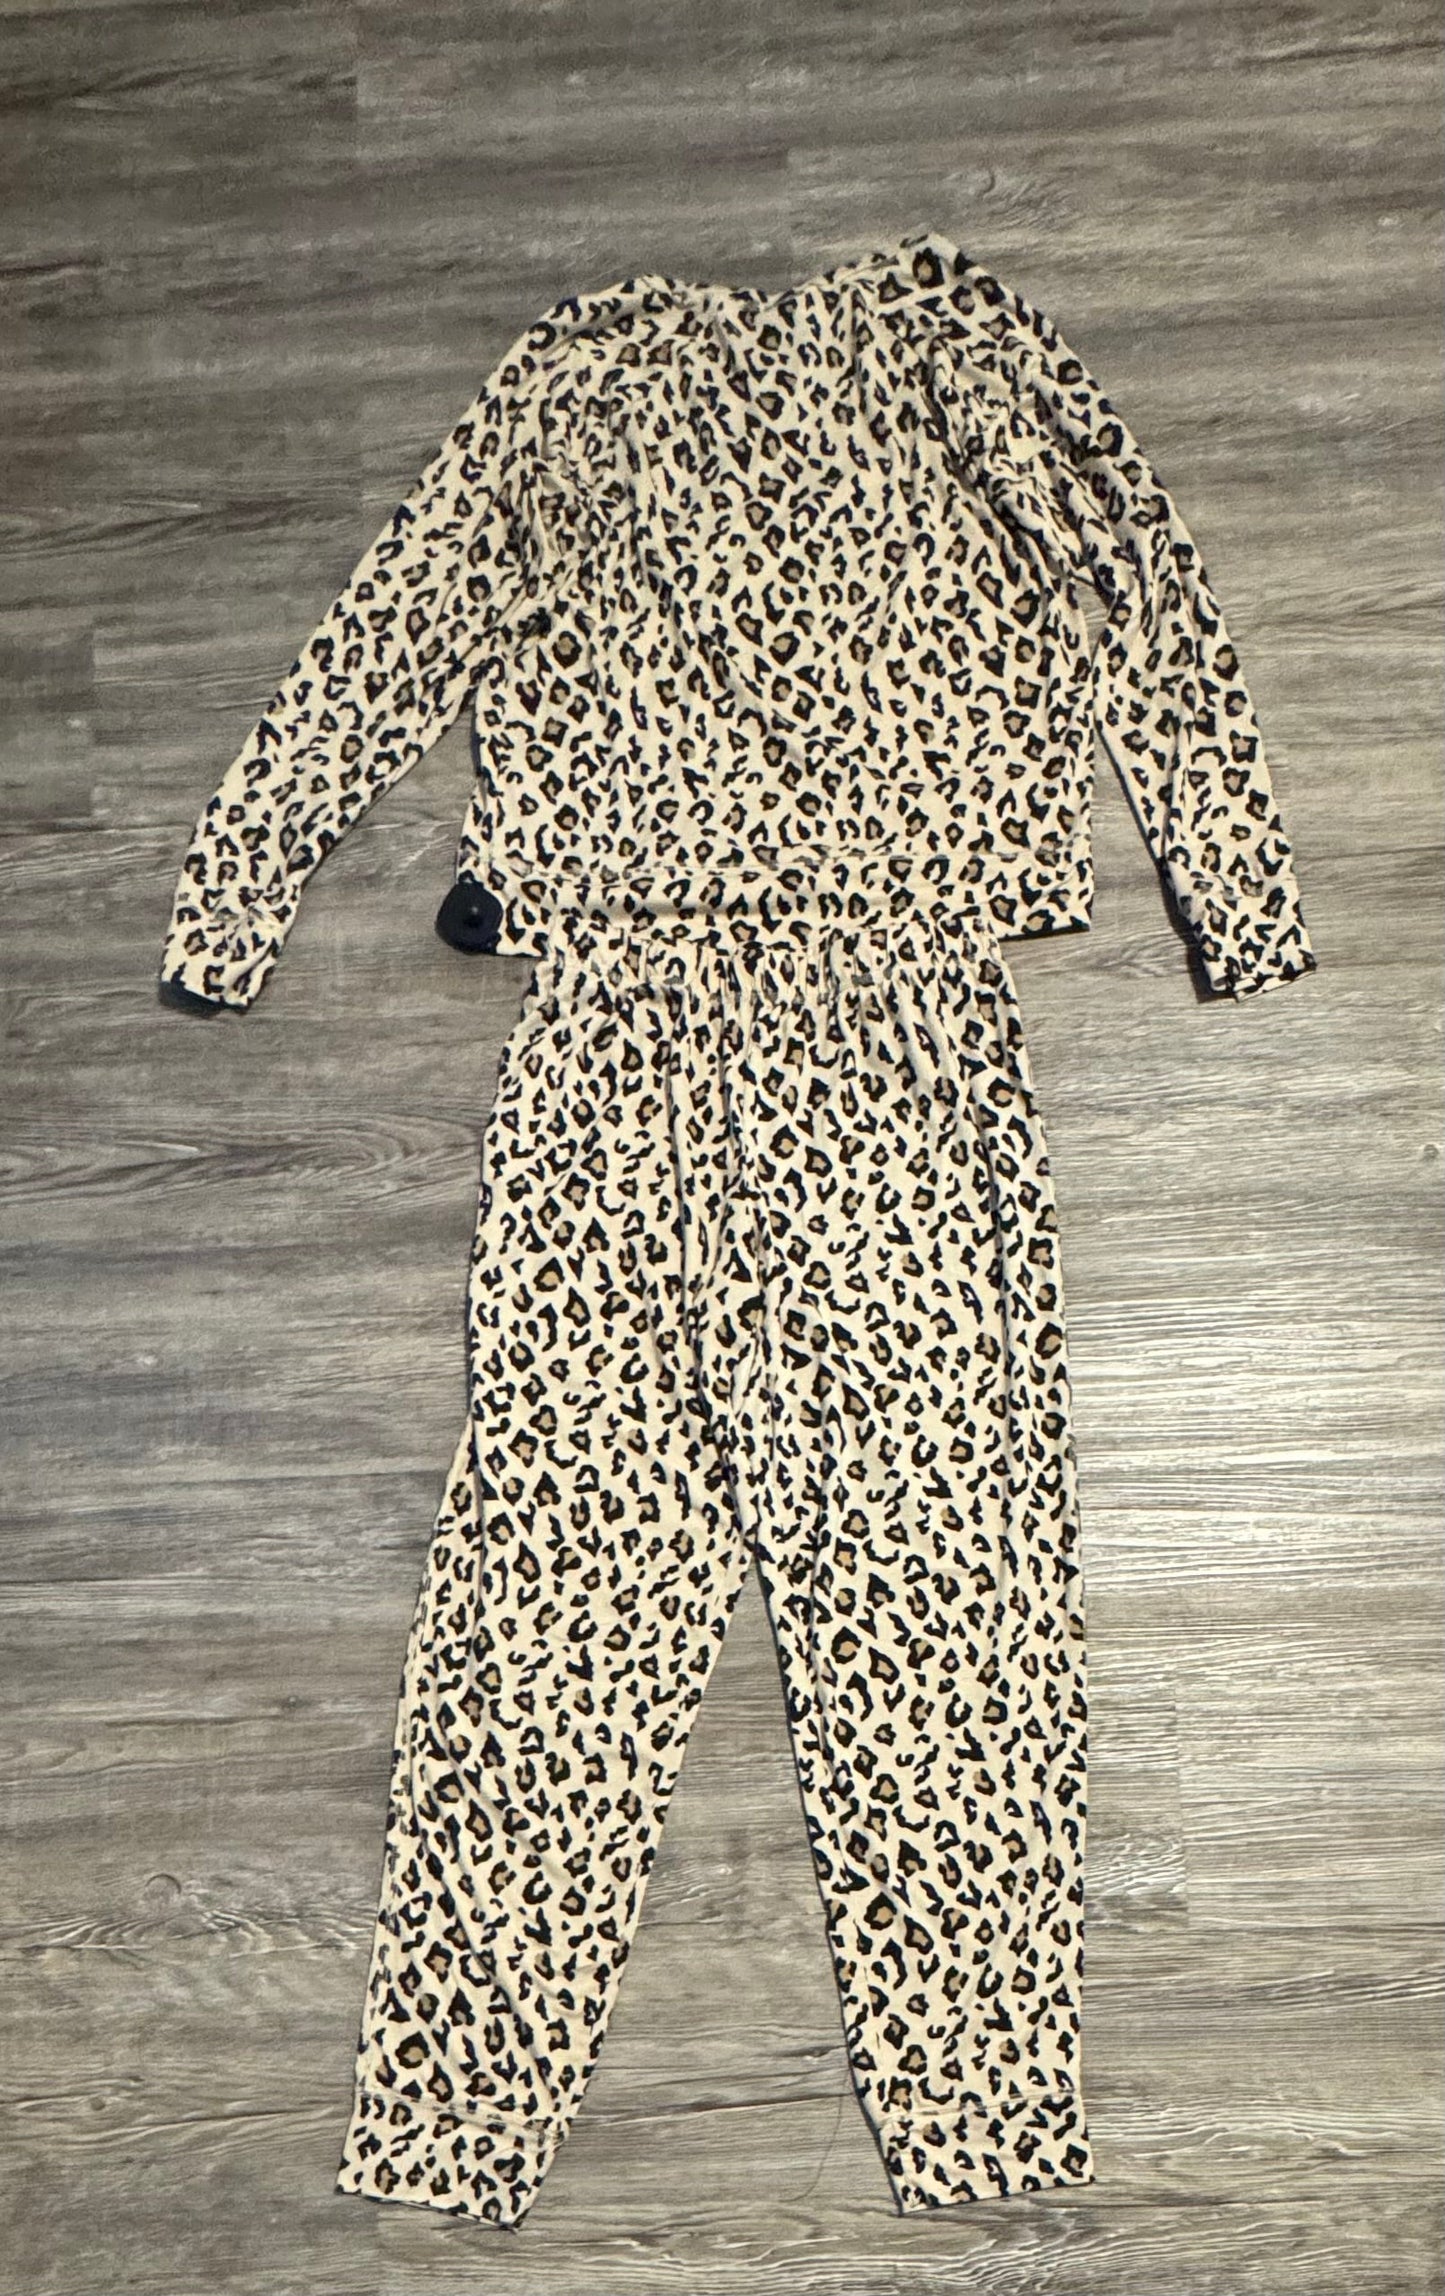 Pajamas 2pc By Clothes Mentor  Size: M